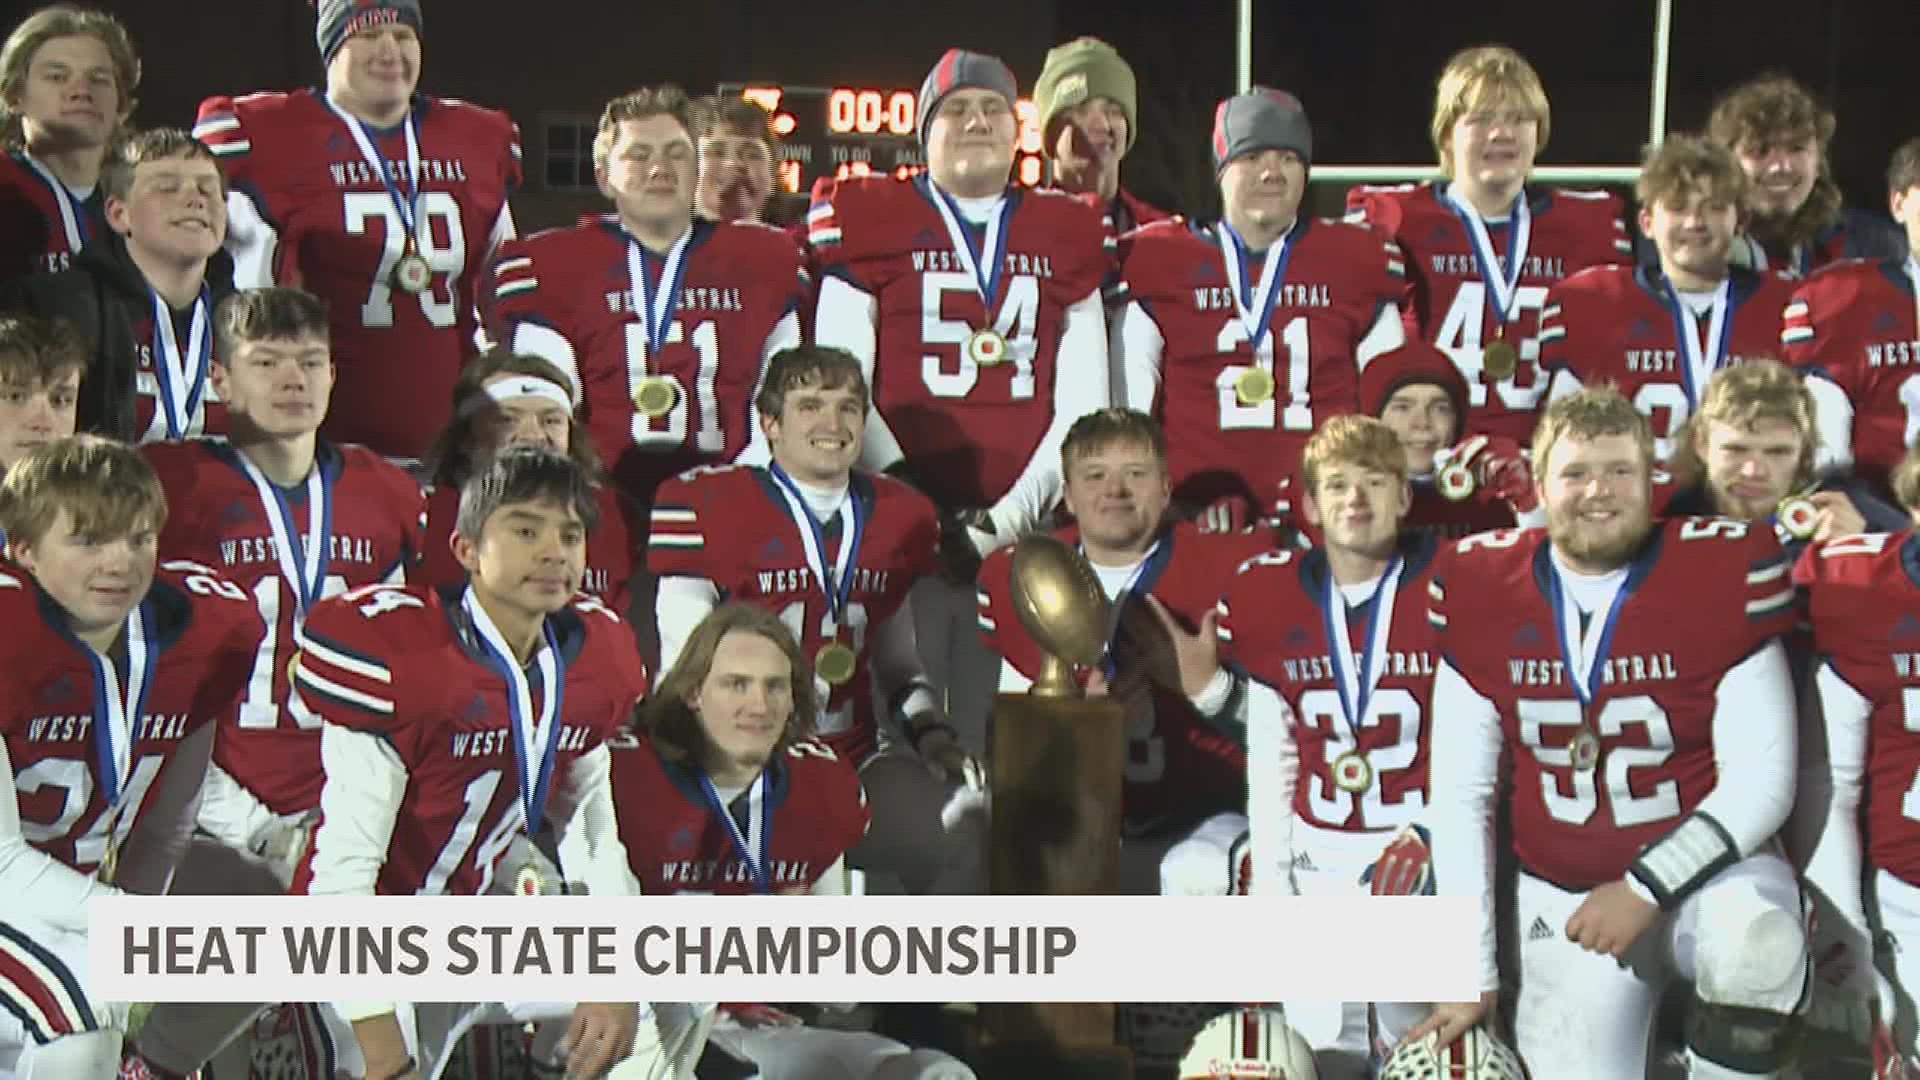 West Central wins their first State Championship in Football, beating Amboy 44-36. The Heat finish a perfect 13-0.